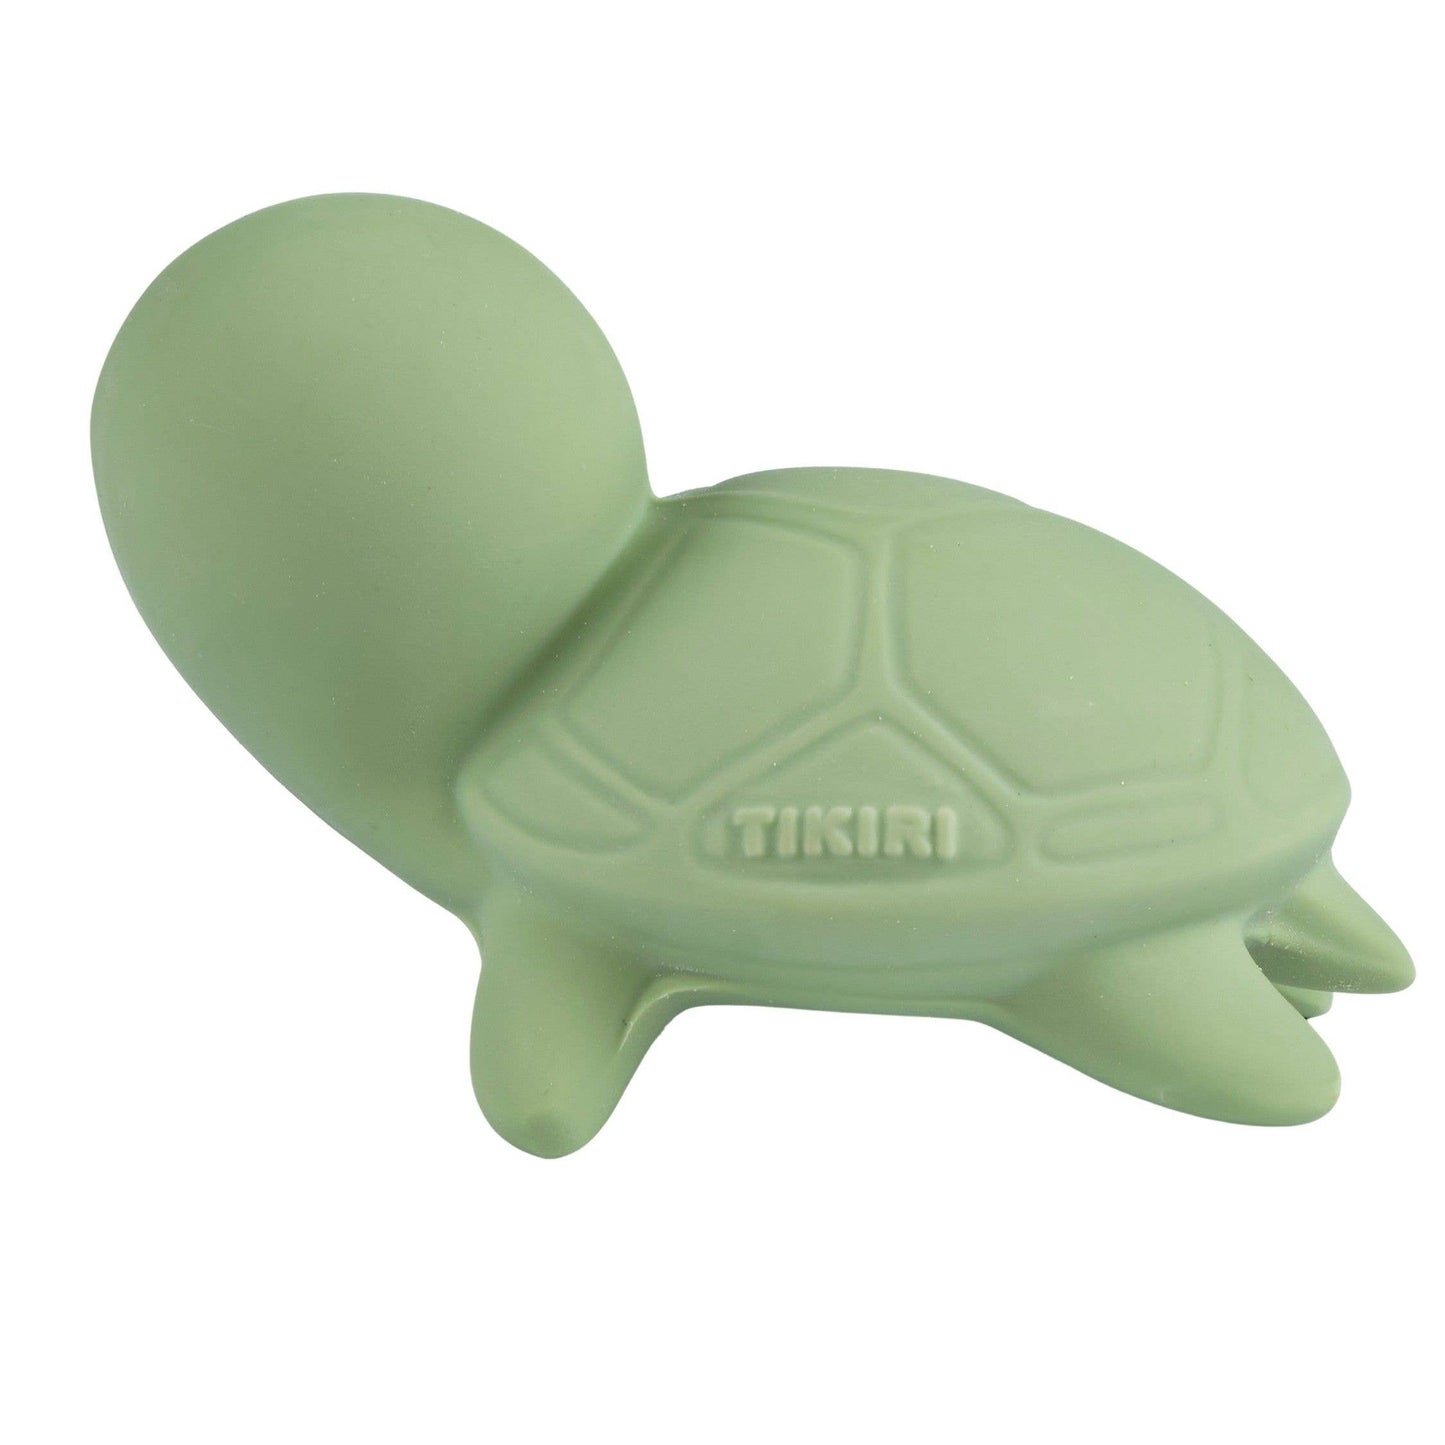 Turtle Natural Organic Rubber Teether, Rattle & Bath Toy